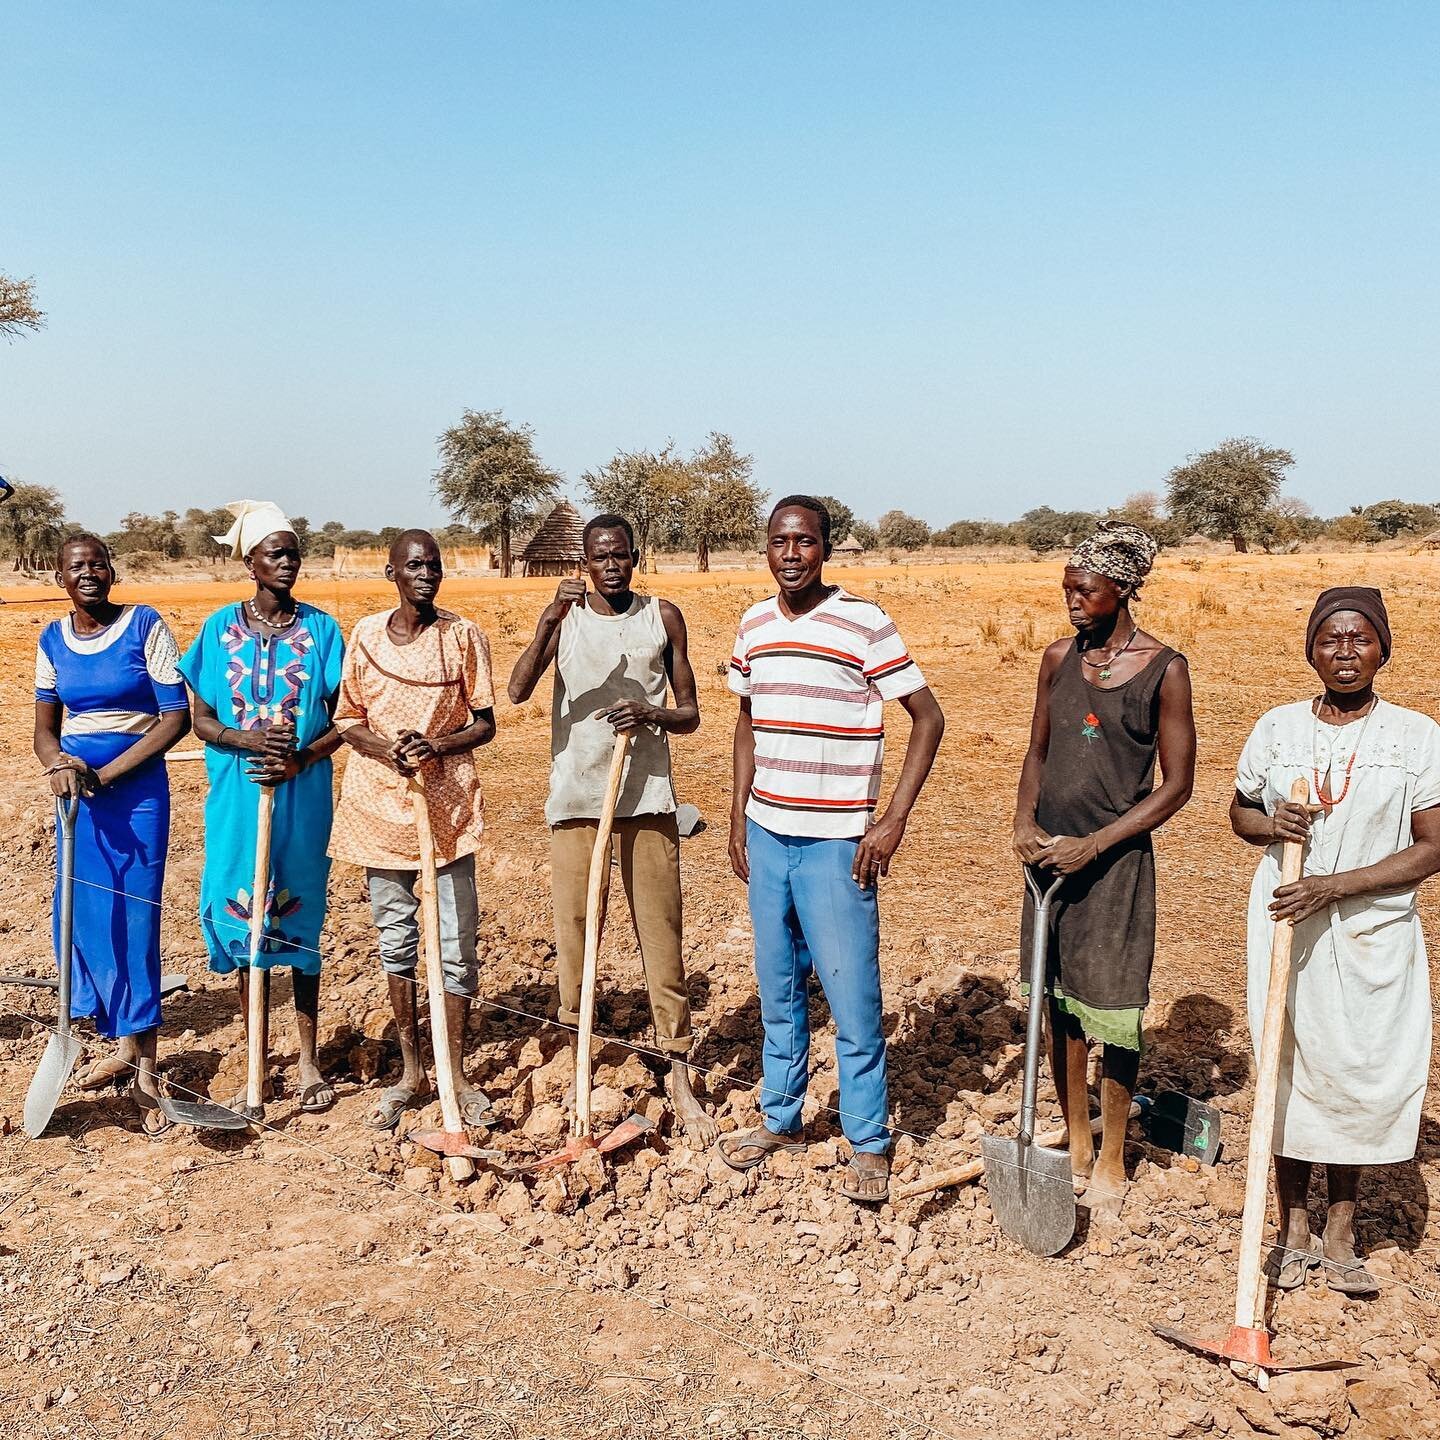 This is how it starts! 

The pick axe has become our #1 tool for tilling and preparing the ground in South Sudan to farm. 

Would you believe us if we said the ground was so hard a few of these broke and had to be replaced?! Because that&rsquo;s a tr